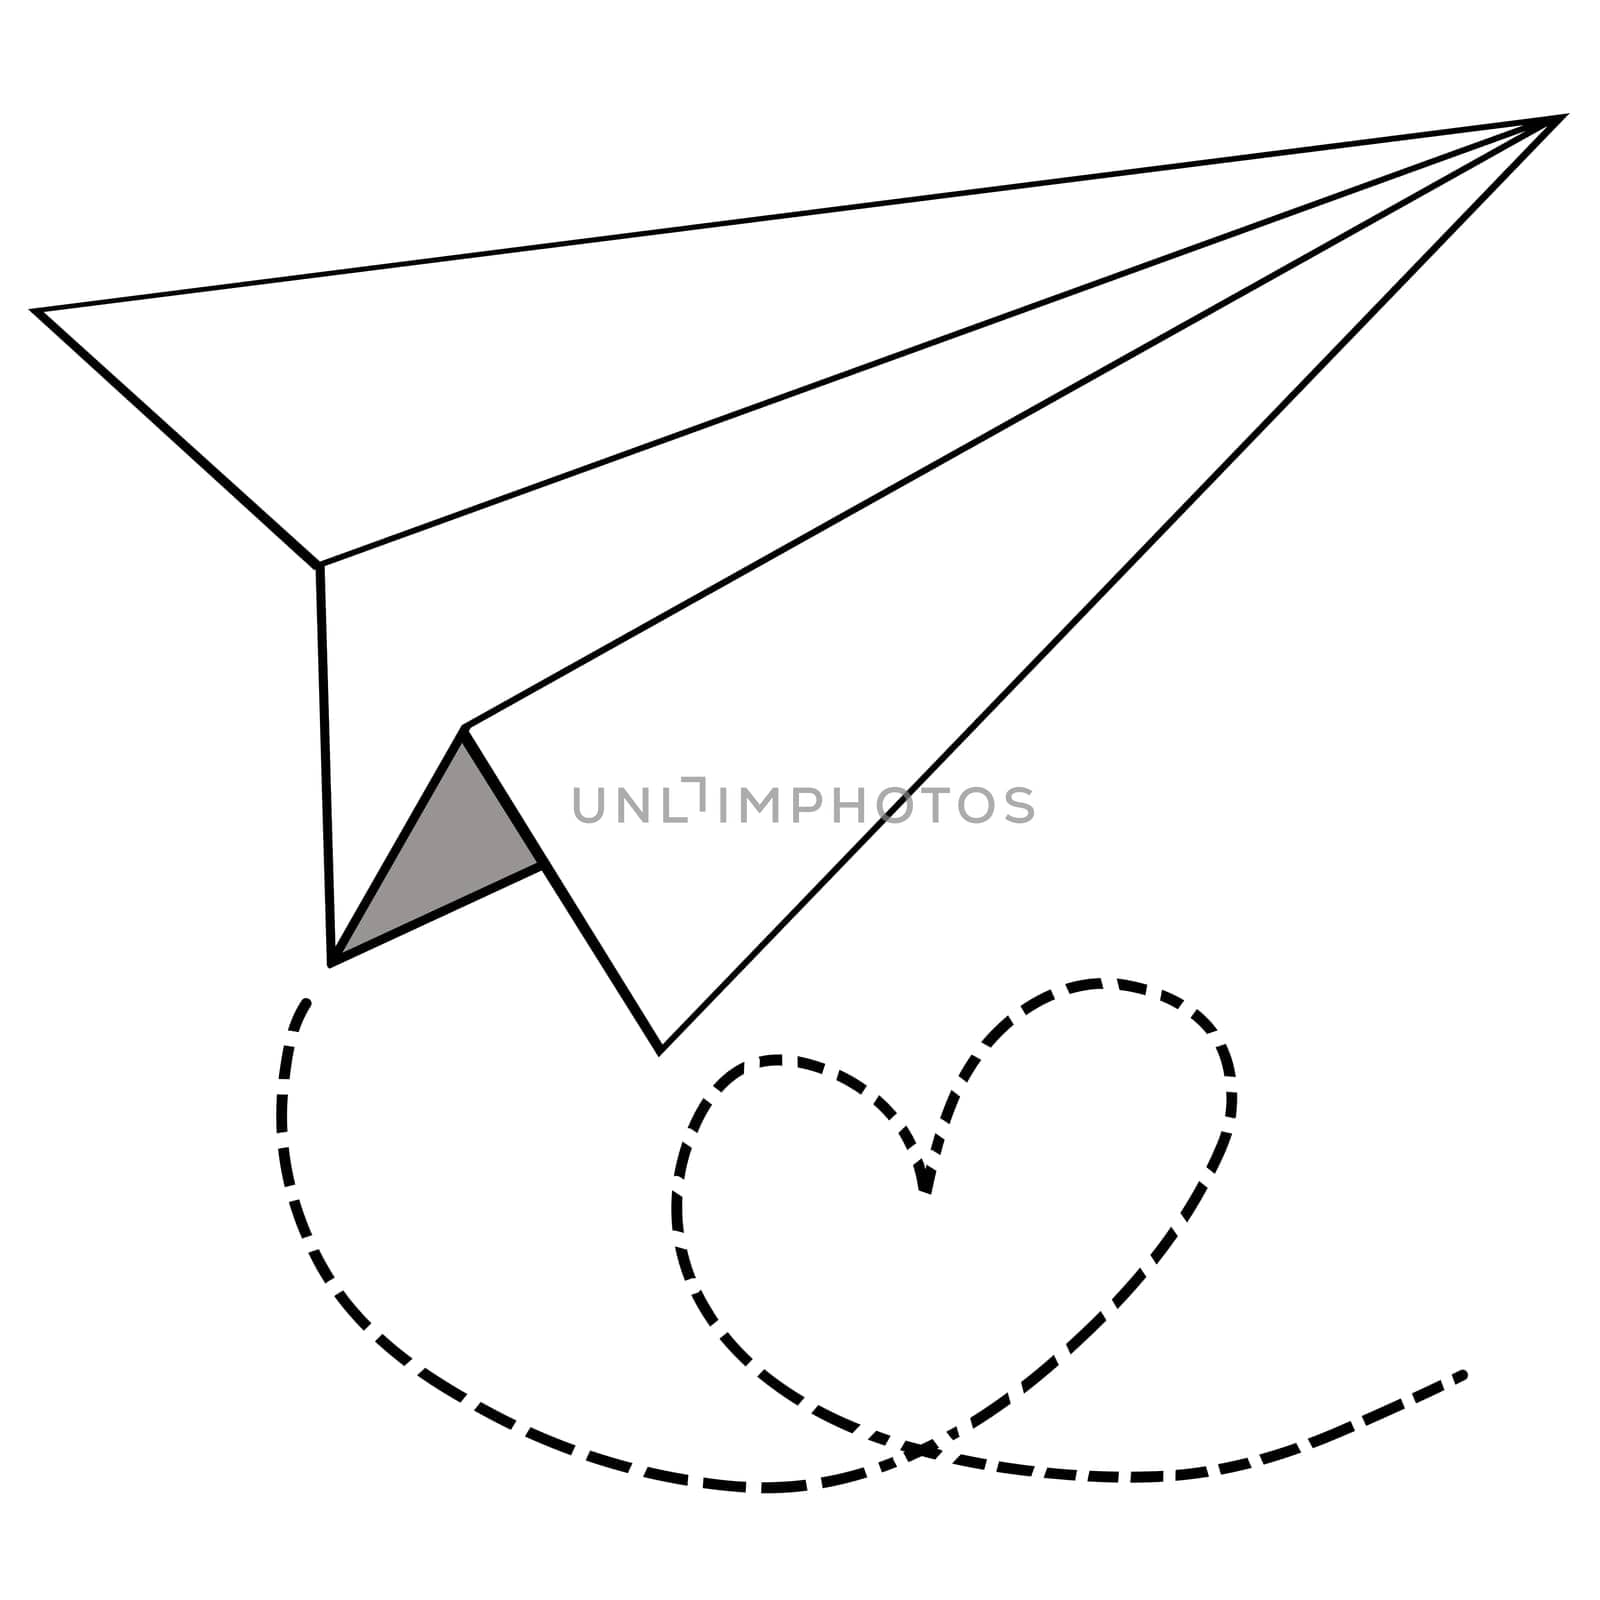 Drawing of paper plane flying isolated on white background for usage as an illustration concept by iamnoonmai